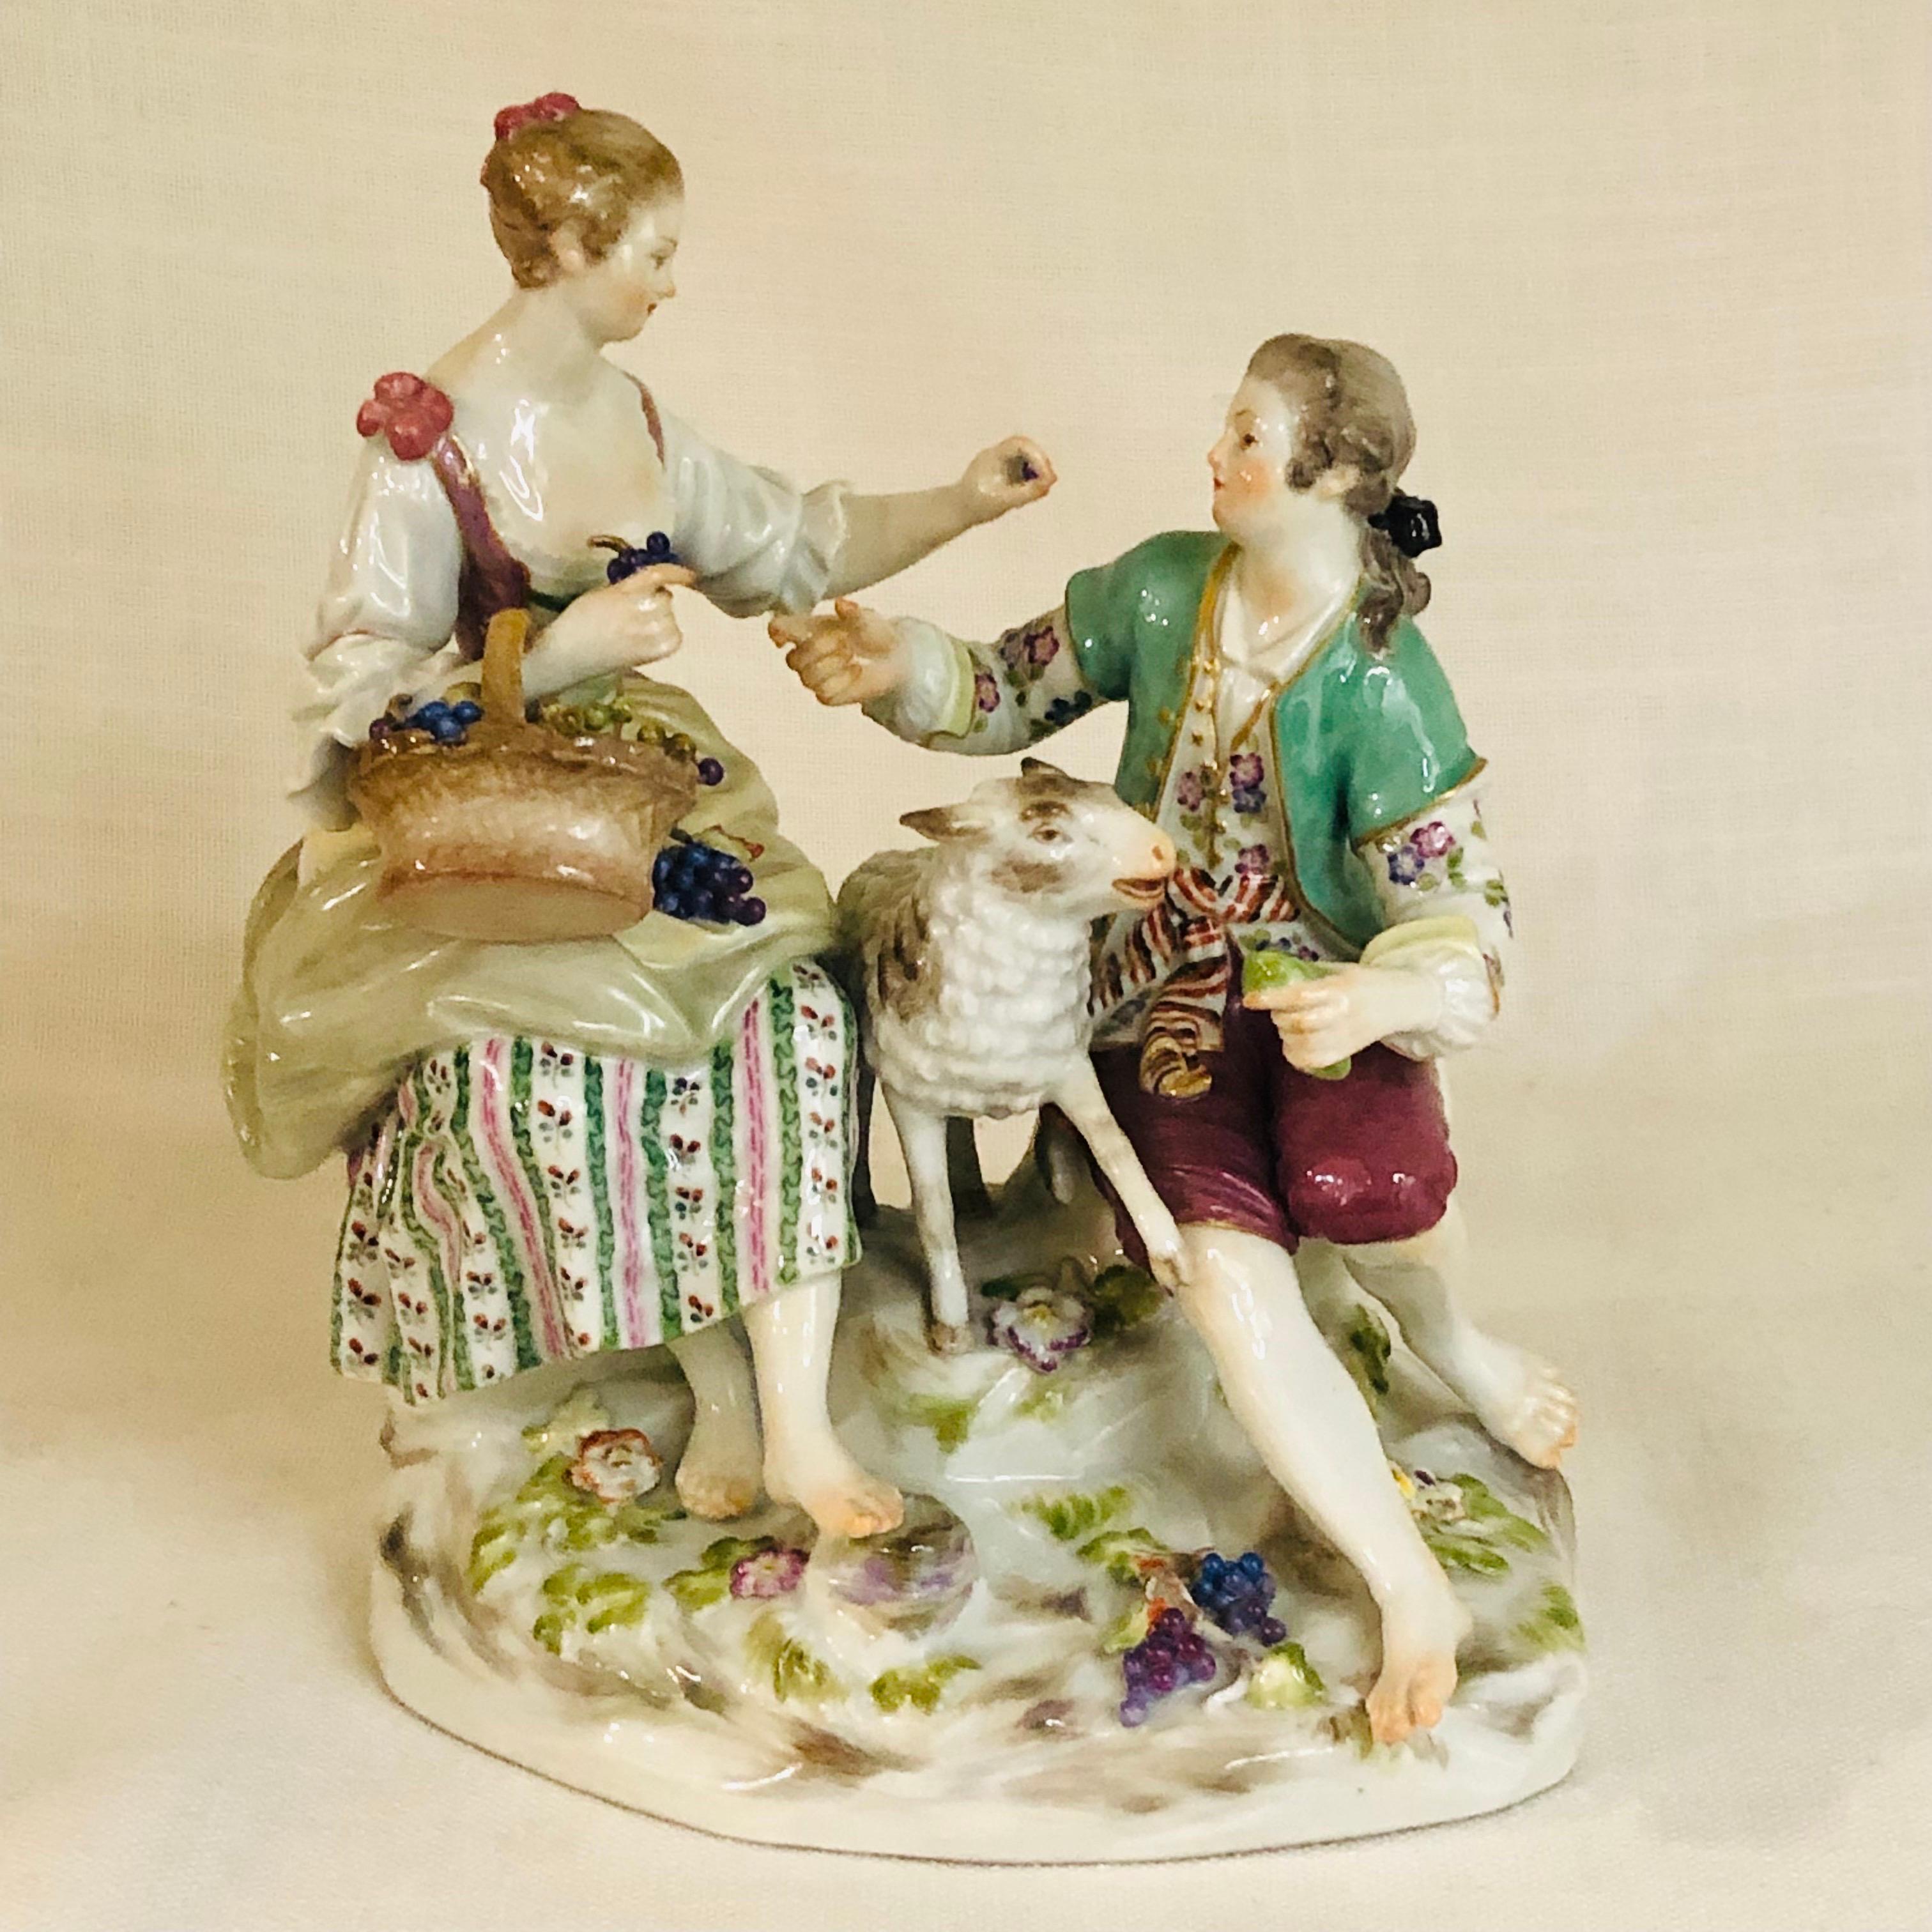 This is an enchanting Meissen figural group of a pastoral scene of a romantic couple in their garden with their lamb. The lady is feeding her lover grapes, while the man is feeding his lamb some greens. They are dressed in colorful summer attire